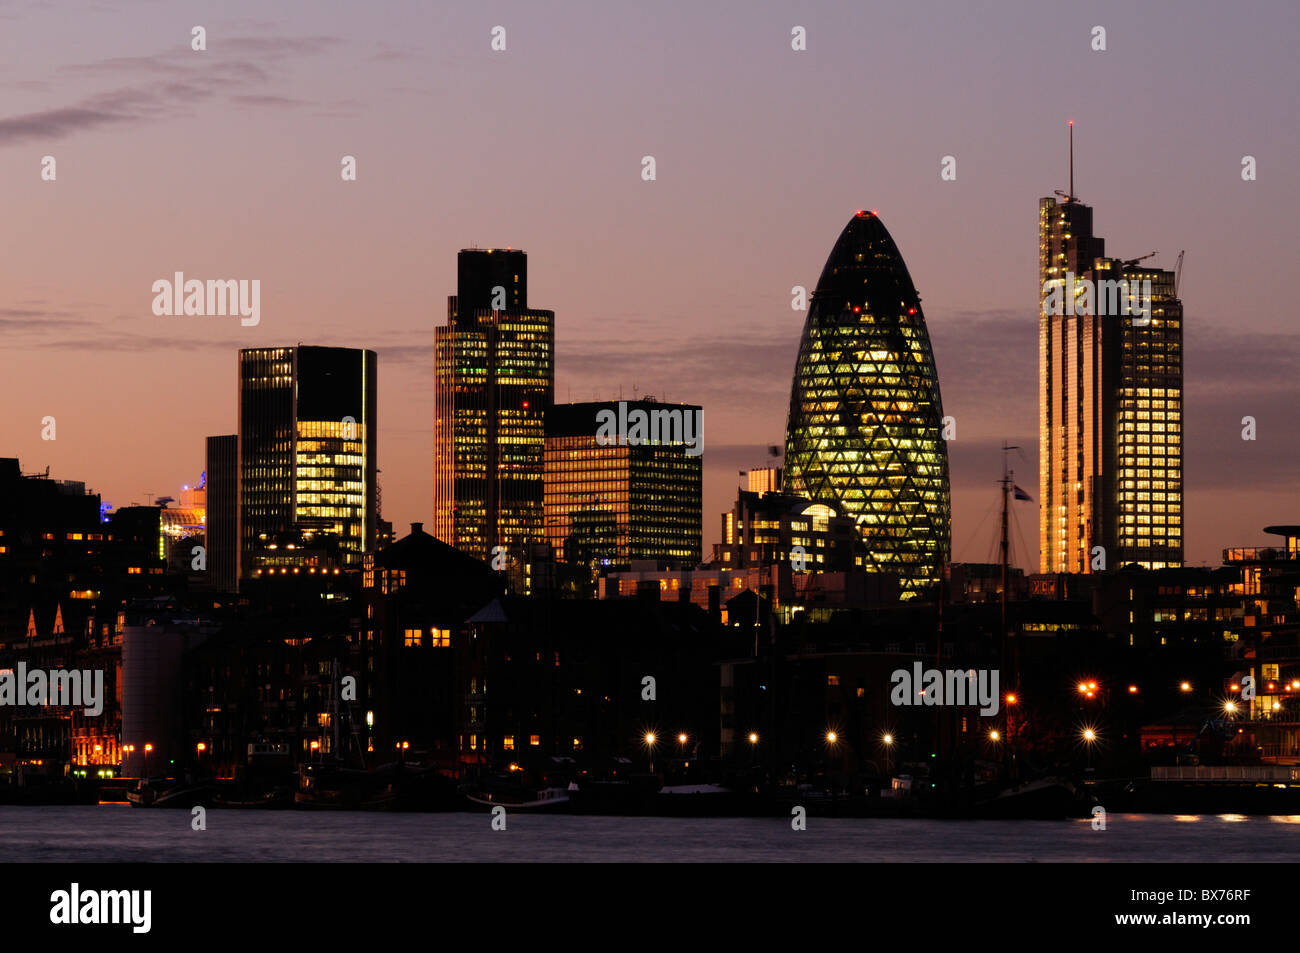 City of London Skyline at Night including Tower 42, 30 St Mary Axe and Heron Tower from Bermondsey,  London, England, UK Stock Photo